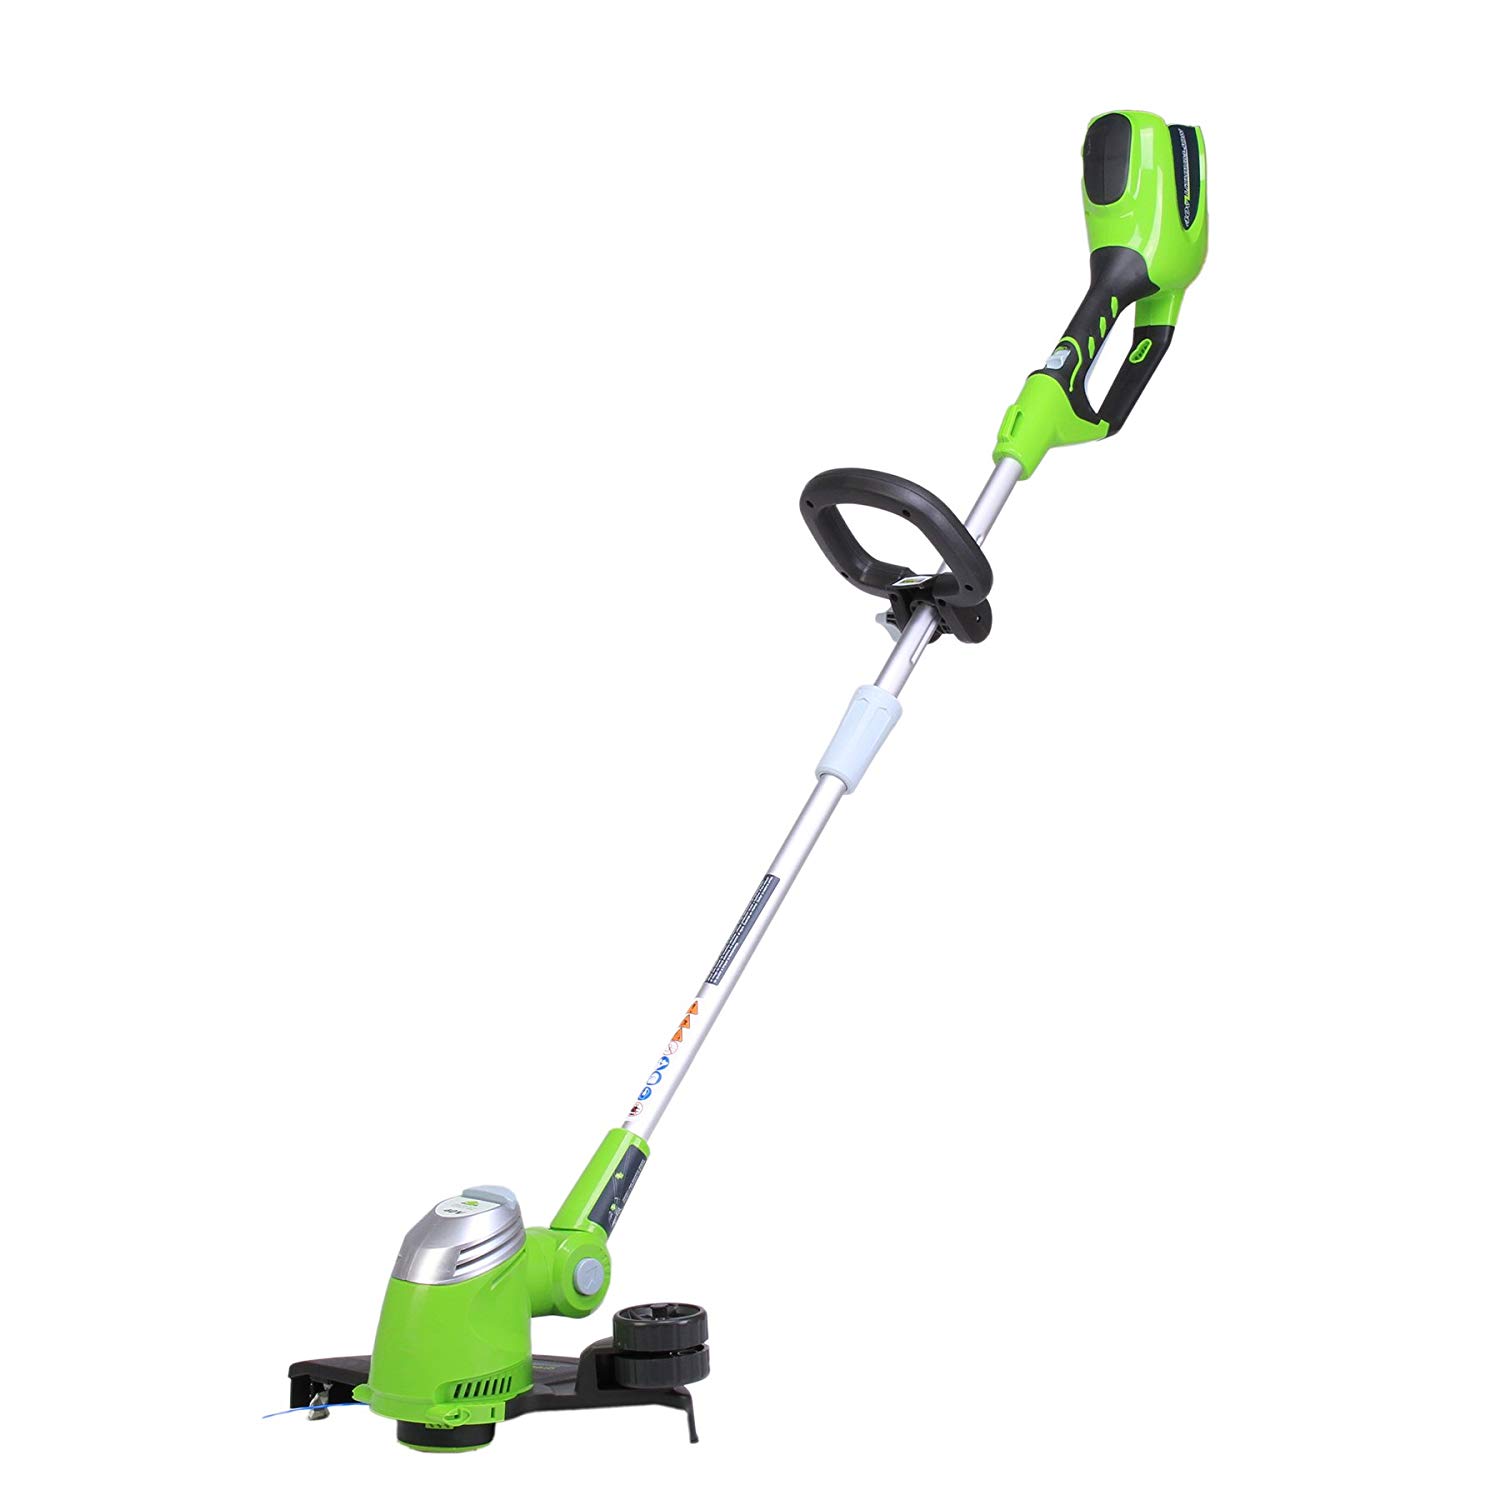 amazon shark ion f80 stick vac deal of the day greenworks 13 inch 40v cordless string trimmer battery not included 21332 750x